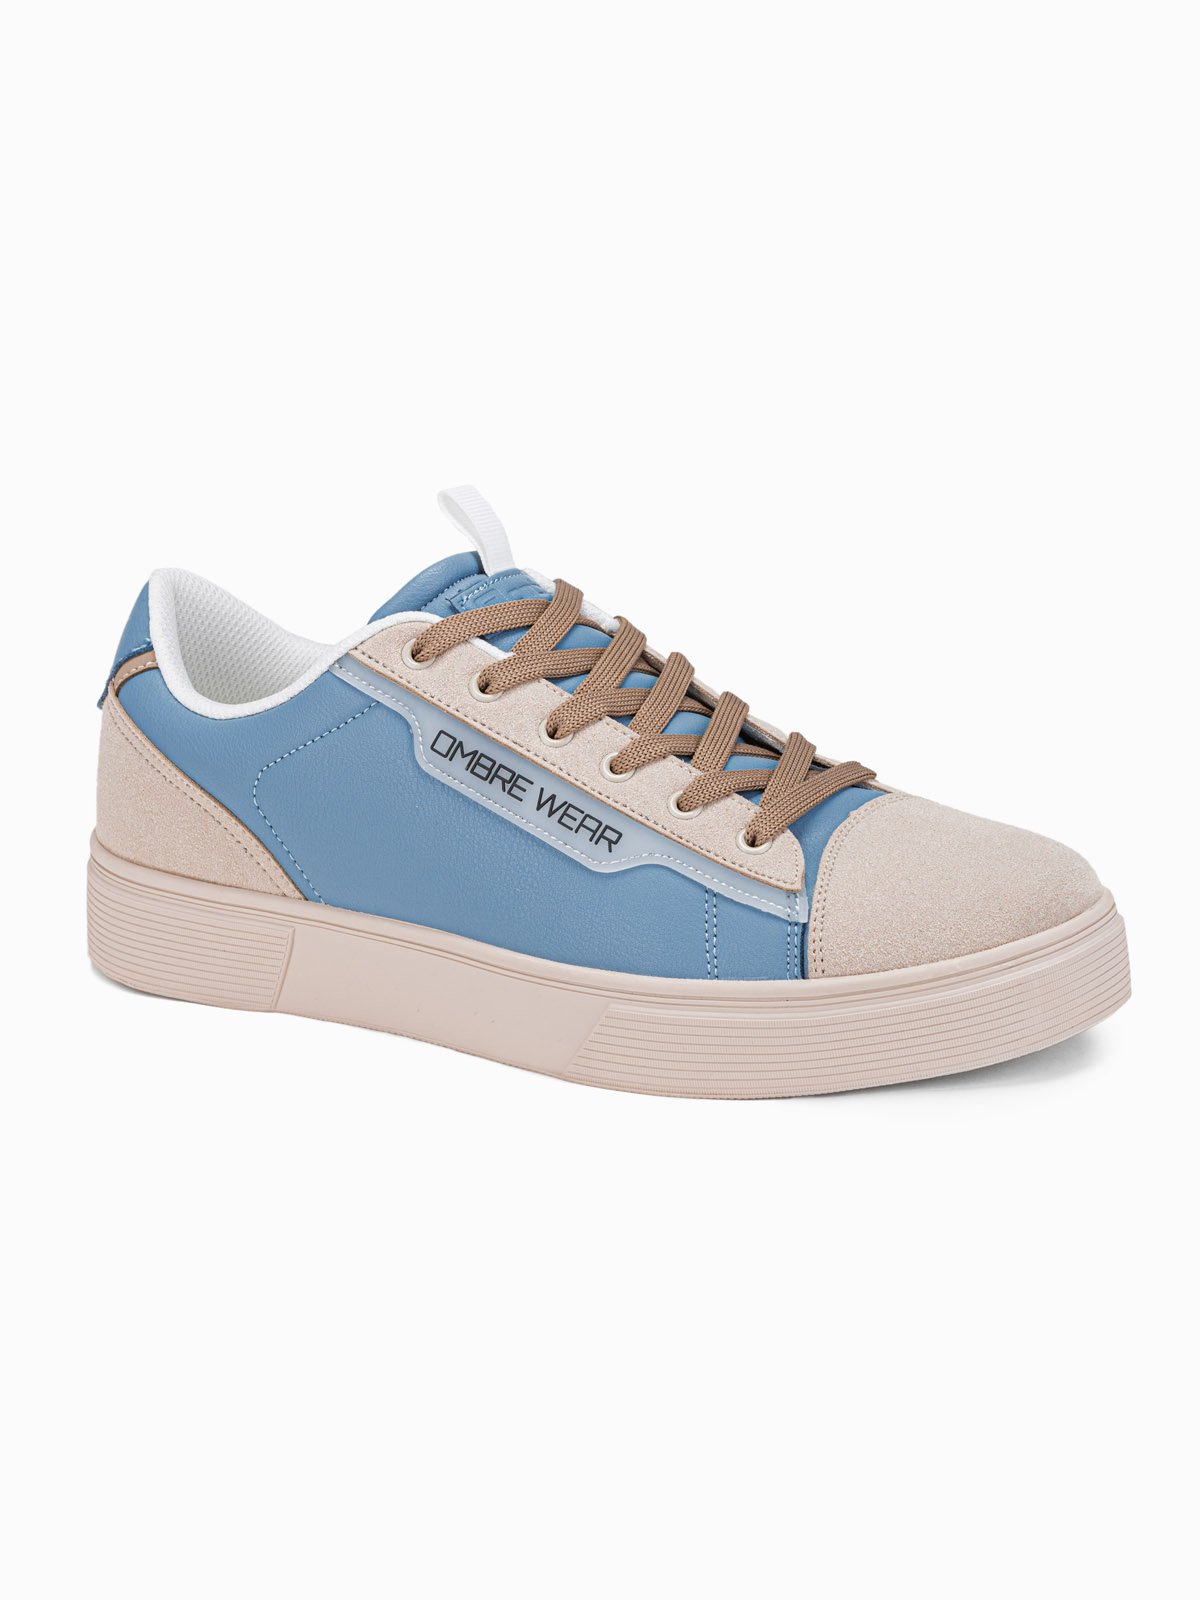 ombre clothing men's casual sneakers t348